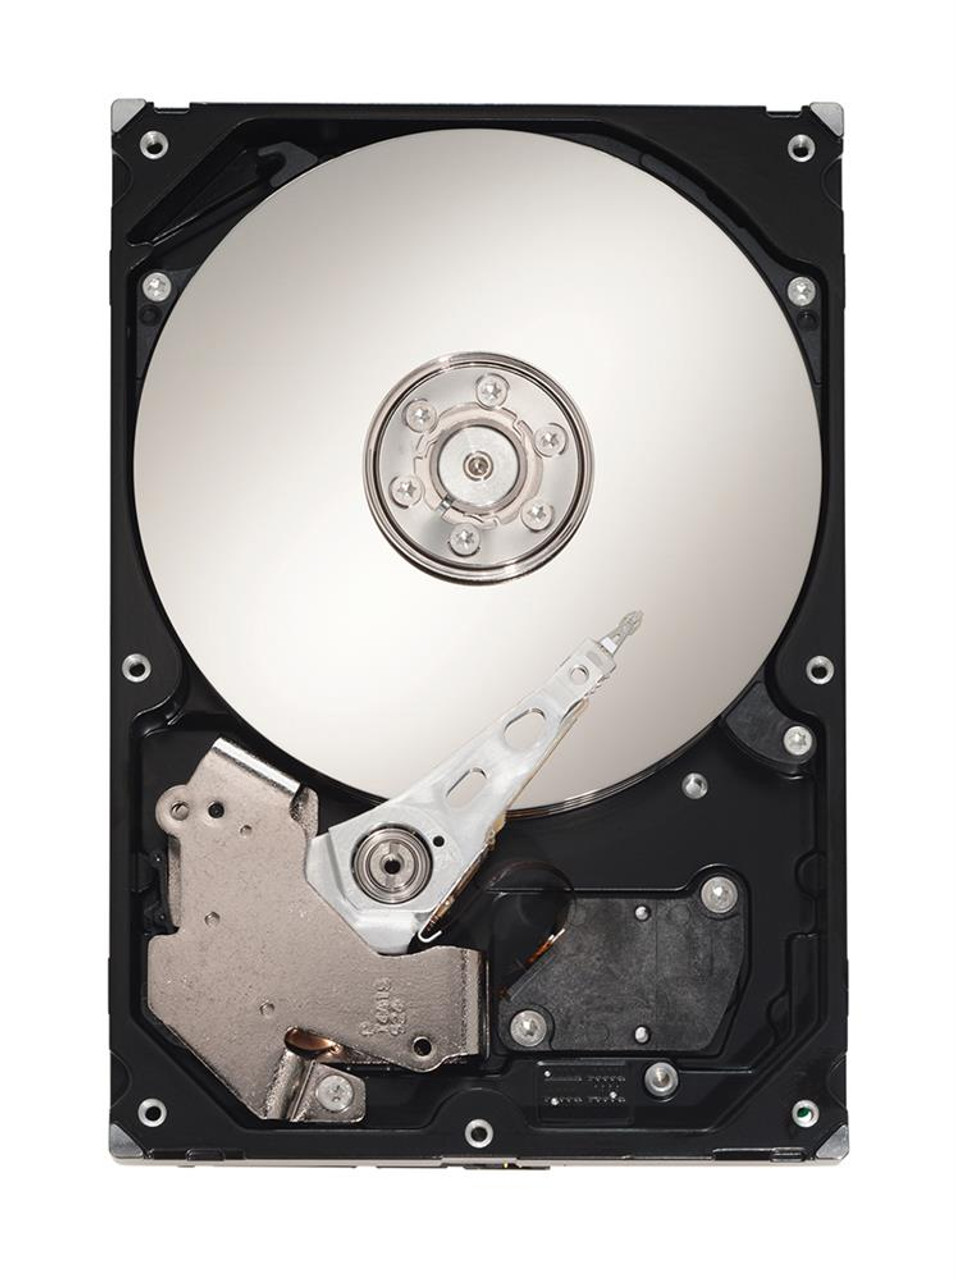 765251-002 HP 6TB 7200RPM SATA 6Gbps Midline (512e) 3.5-inch Internal Hard  Drive with Smart